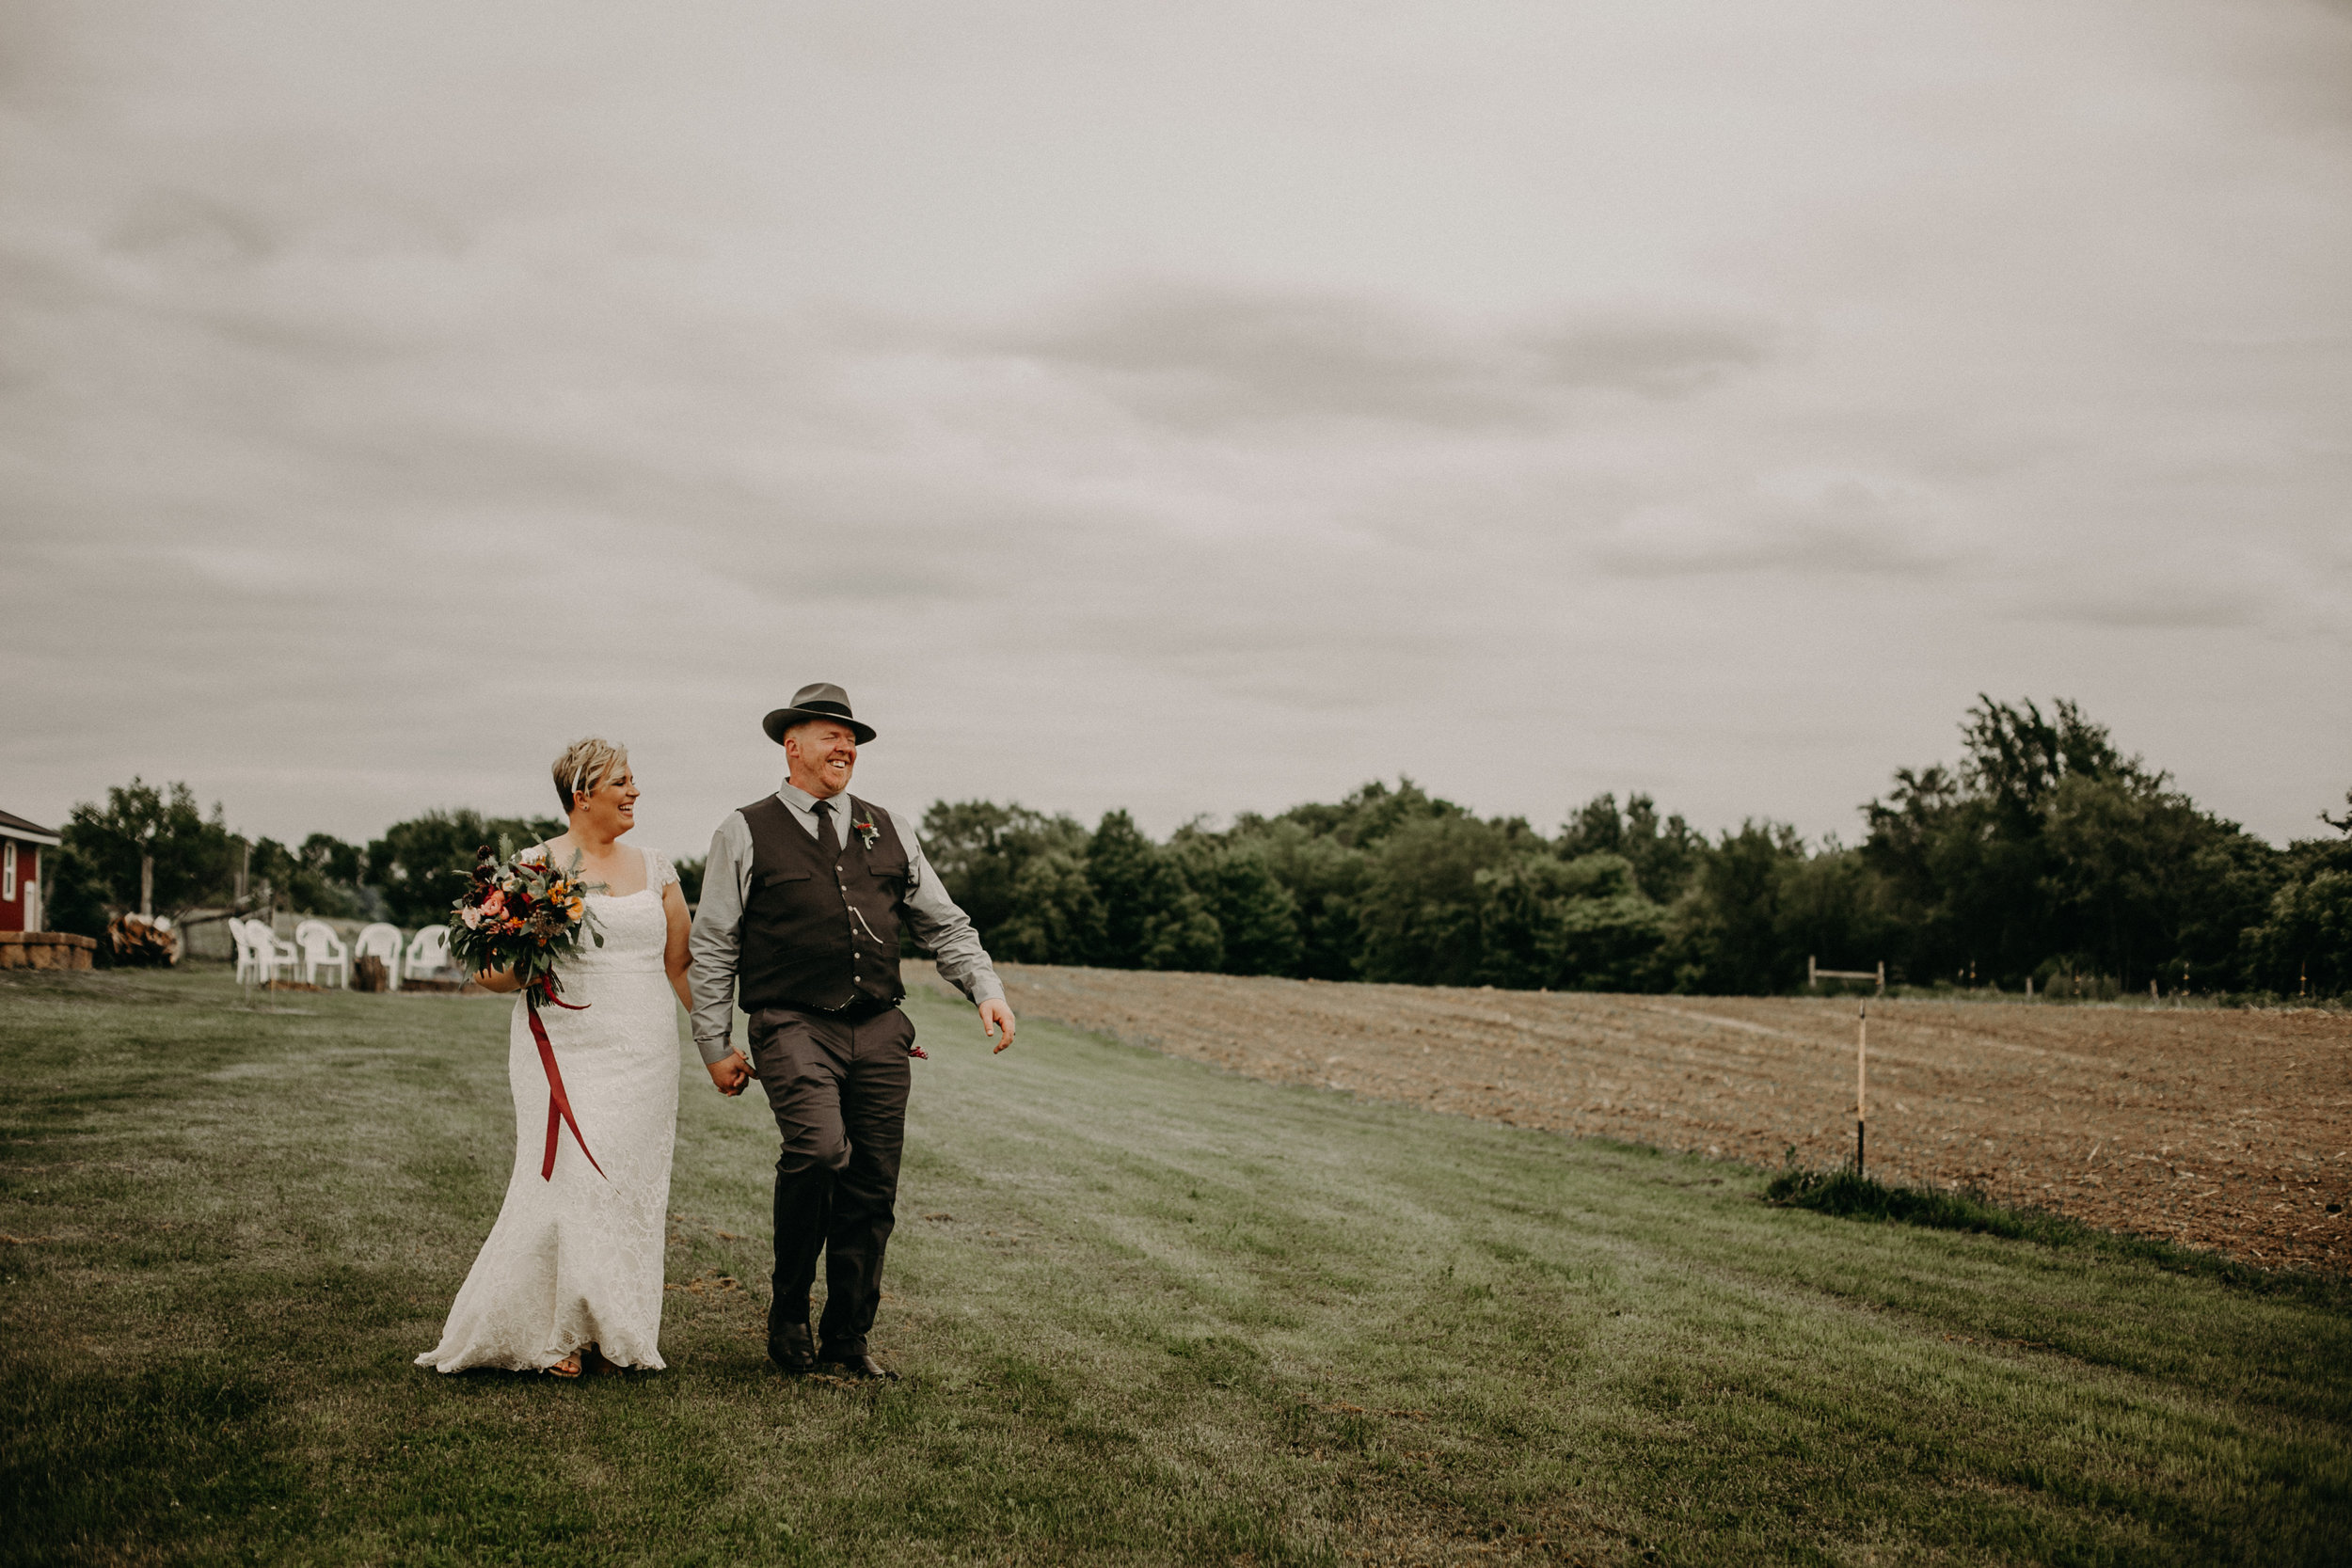  Andrea Wagner Photography provides wedding day photography in Ellsworth WI at Jean Acres Barn 